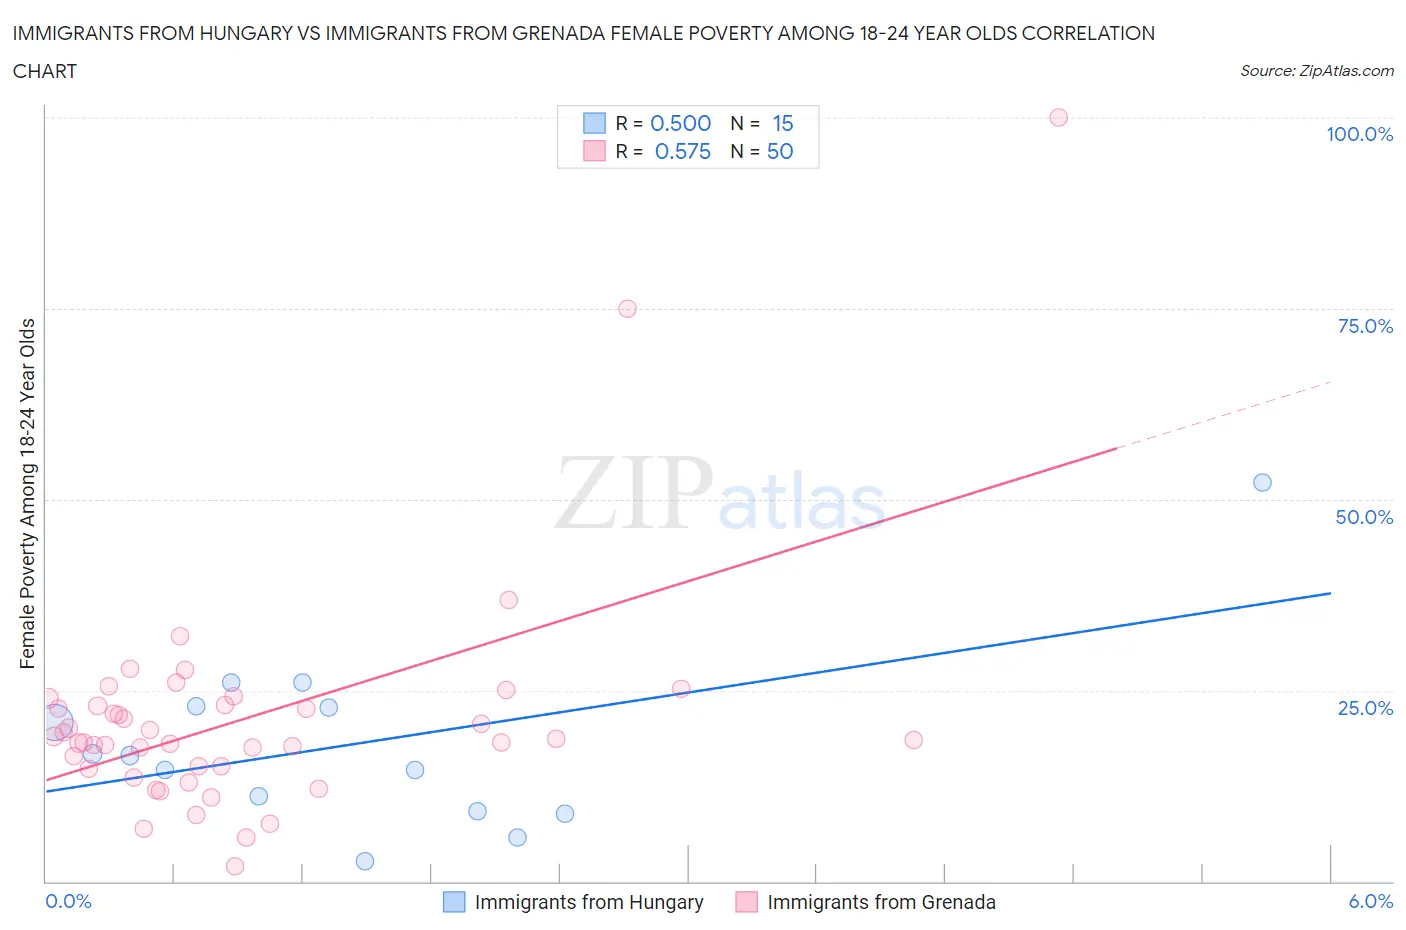 Immigrants from Hungary vs Immigrants from Grenada Female Poverty Among 18-24 Year Olds